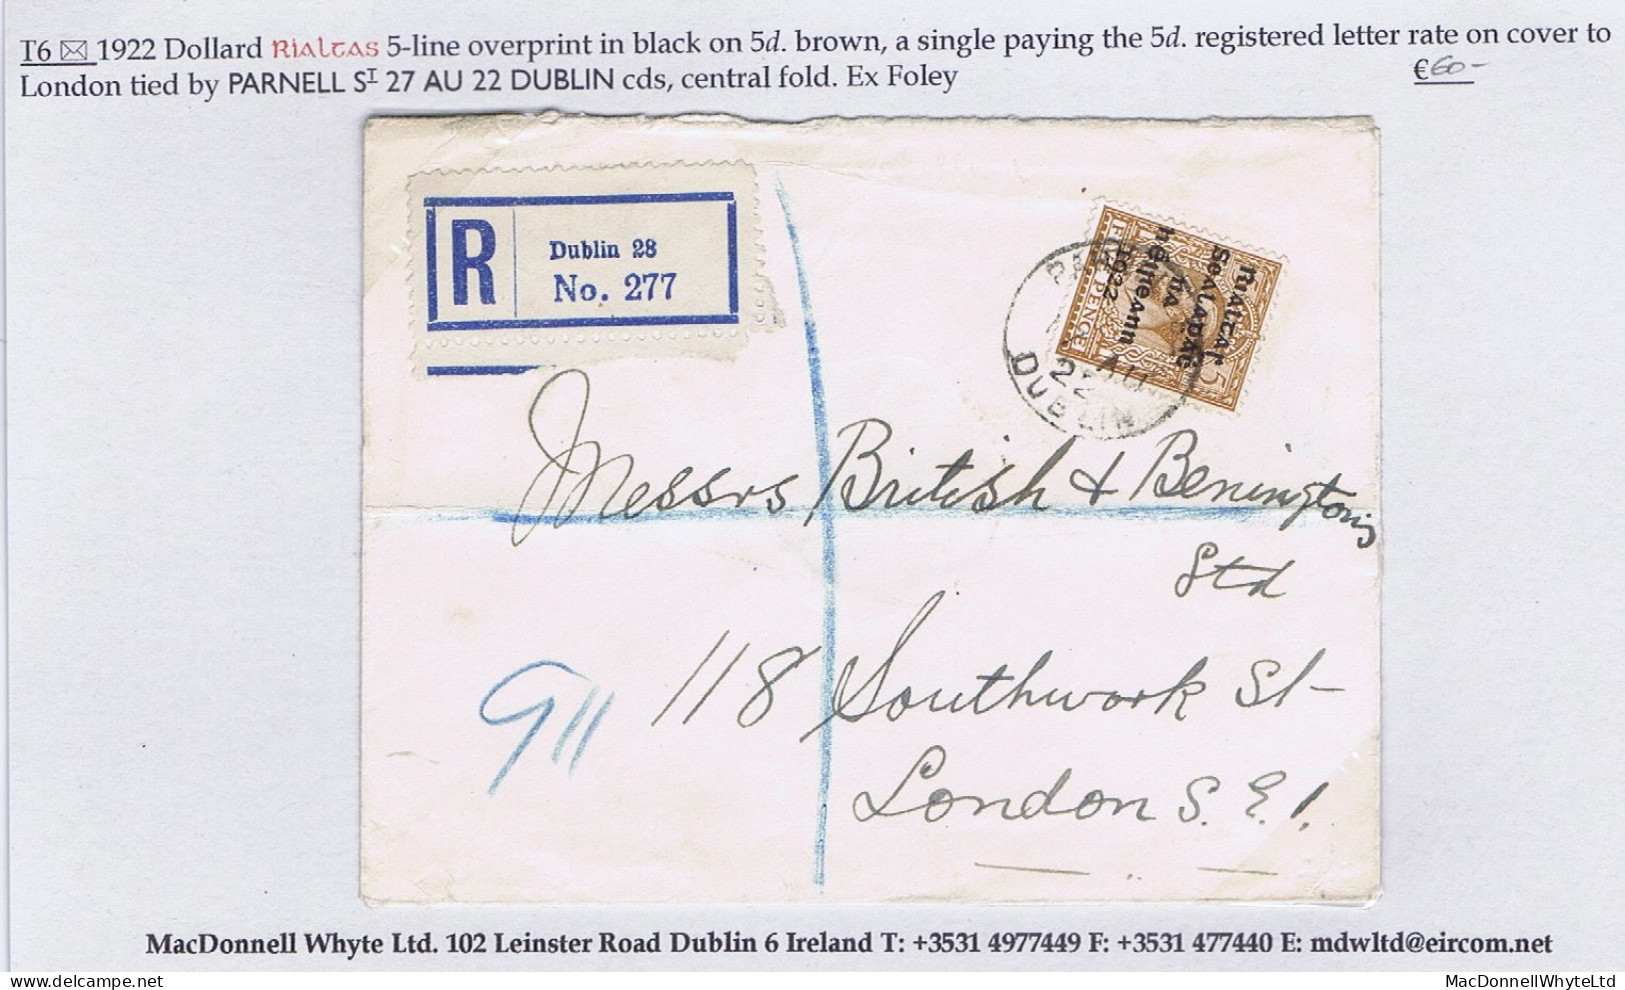 Ireland 1922 Dollard Rialtas 5-line Overprint In Black On 5d Used On Cover To London Tied PARNELL ST DUBLIN 17 AU 22 - Covers & Documents